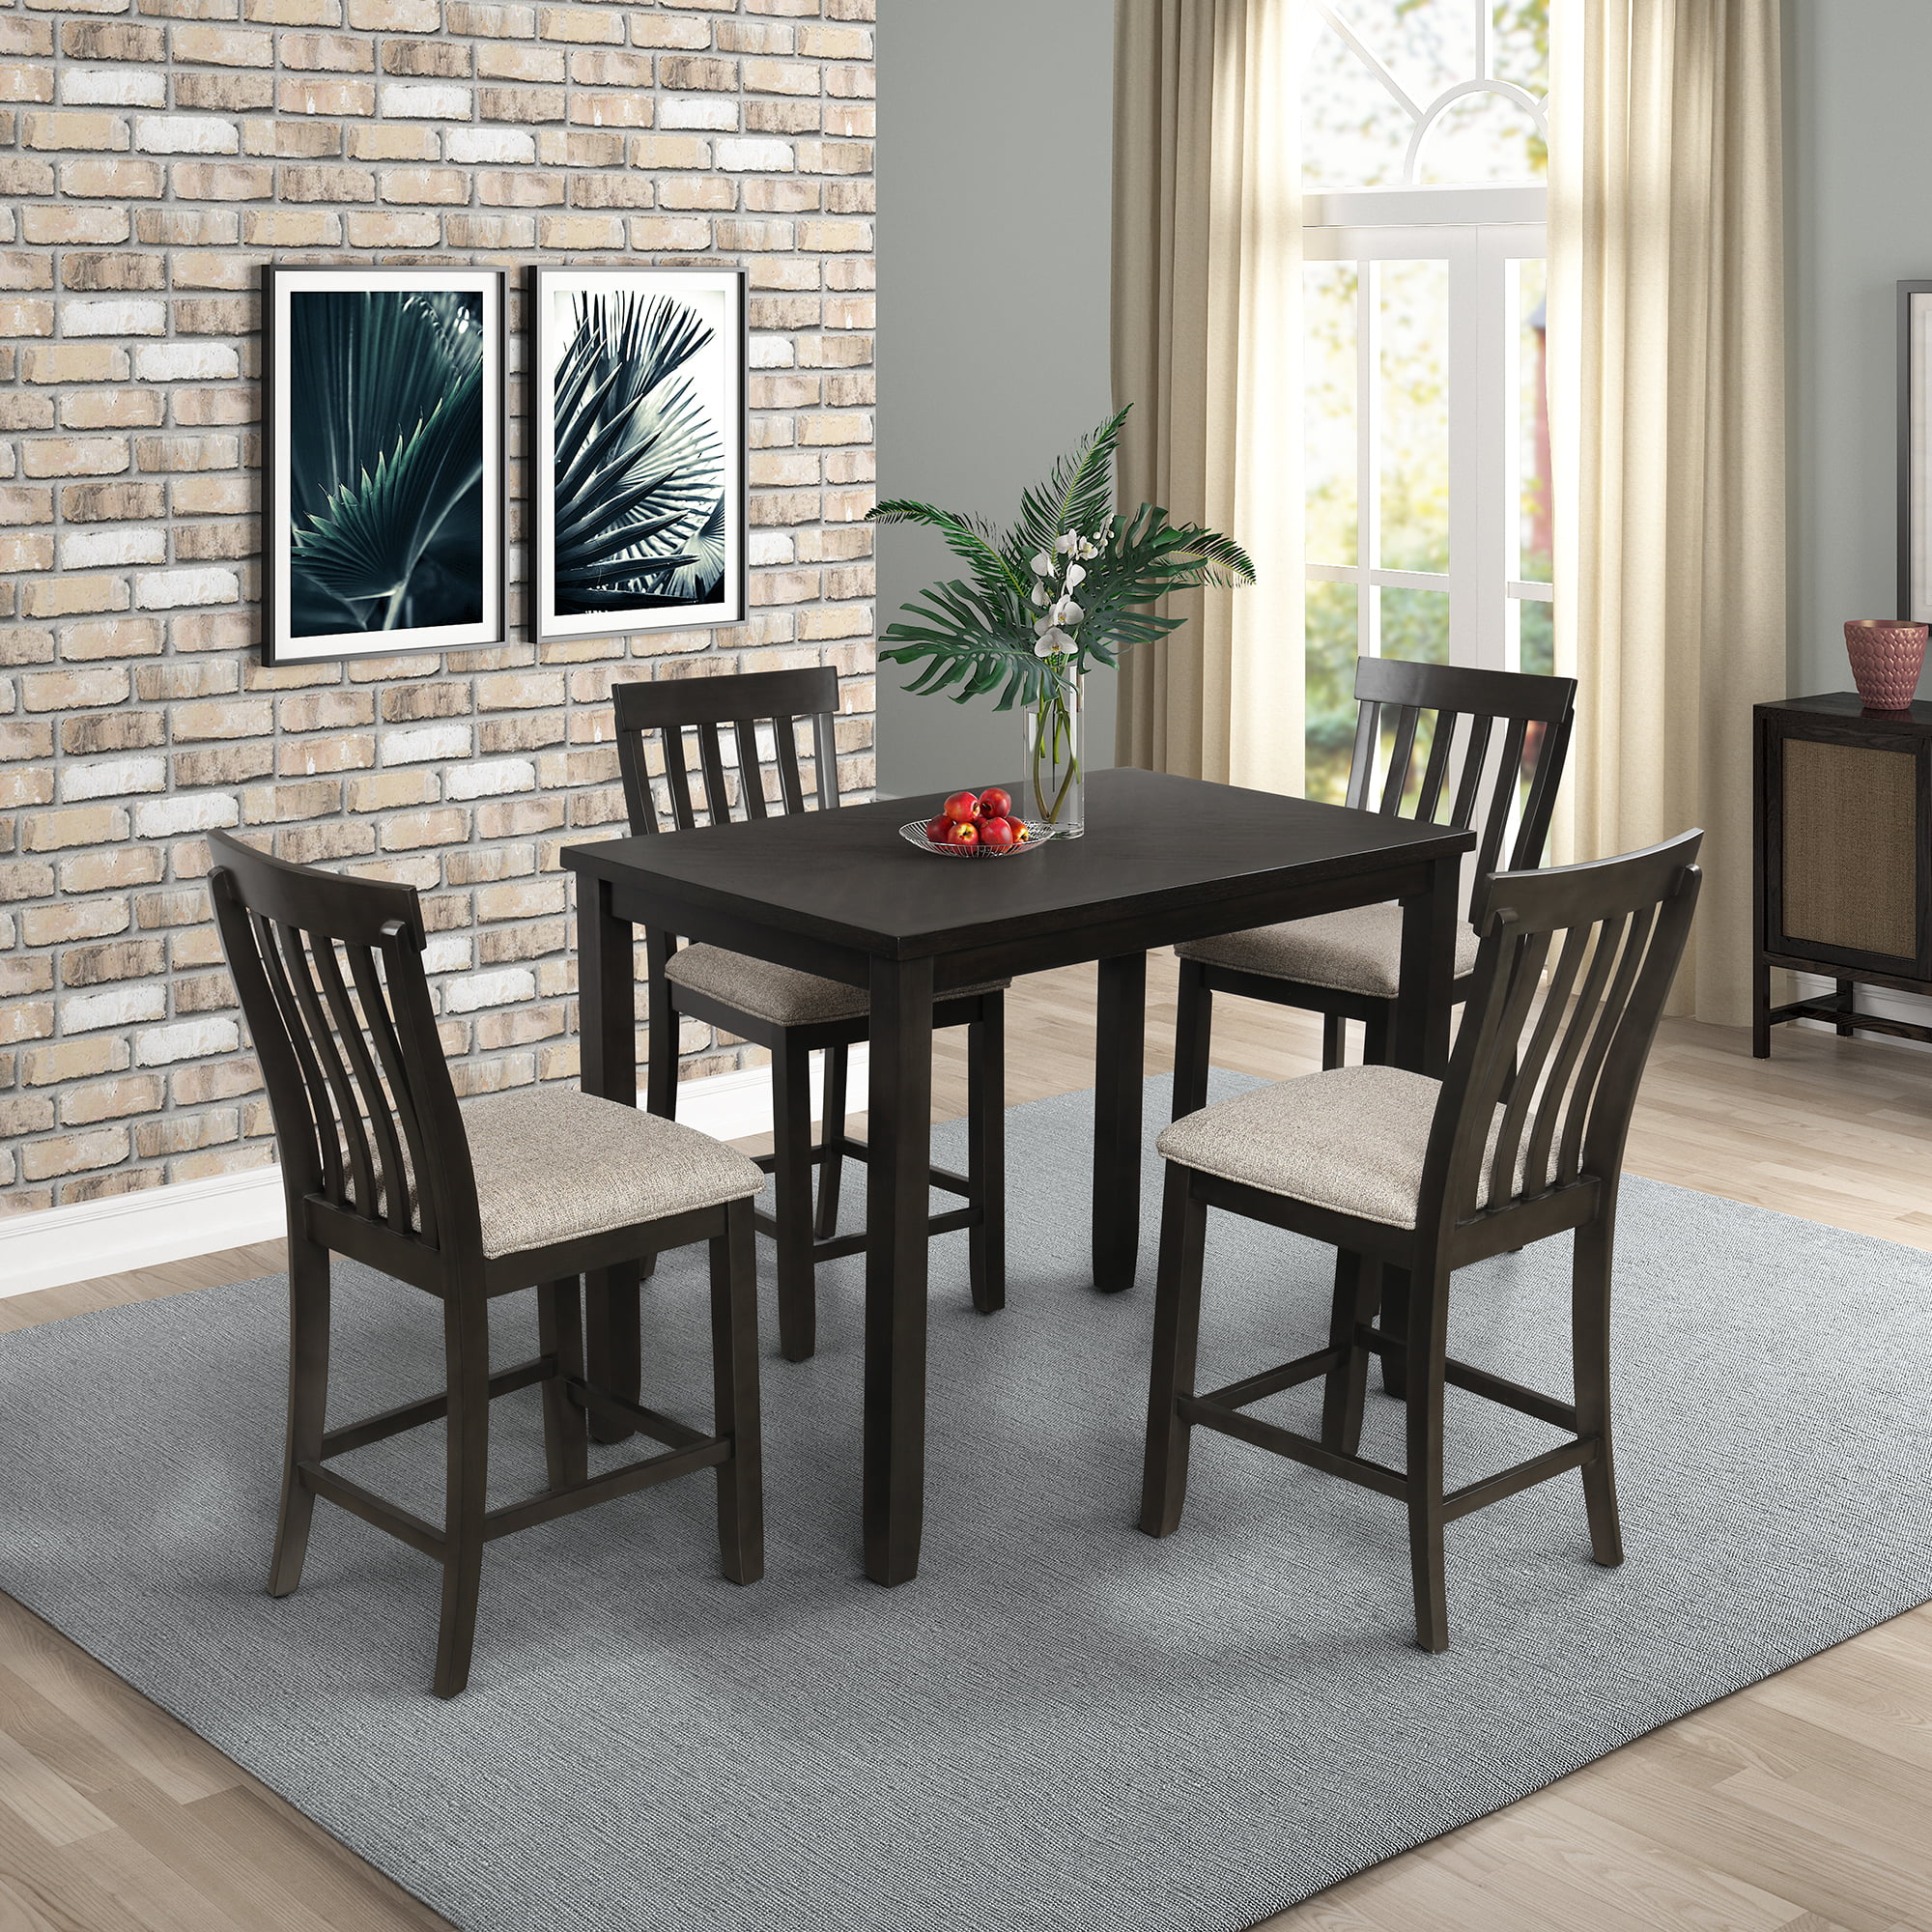 Bar Stools Wood Kitchen Dining Room, High Chairs For Counter Height Table